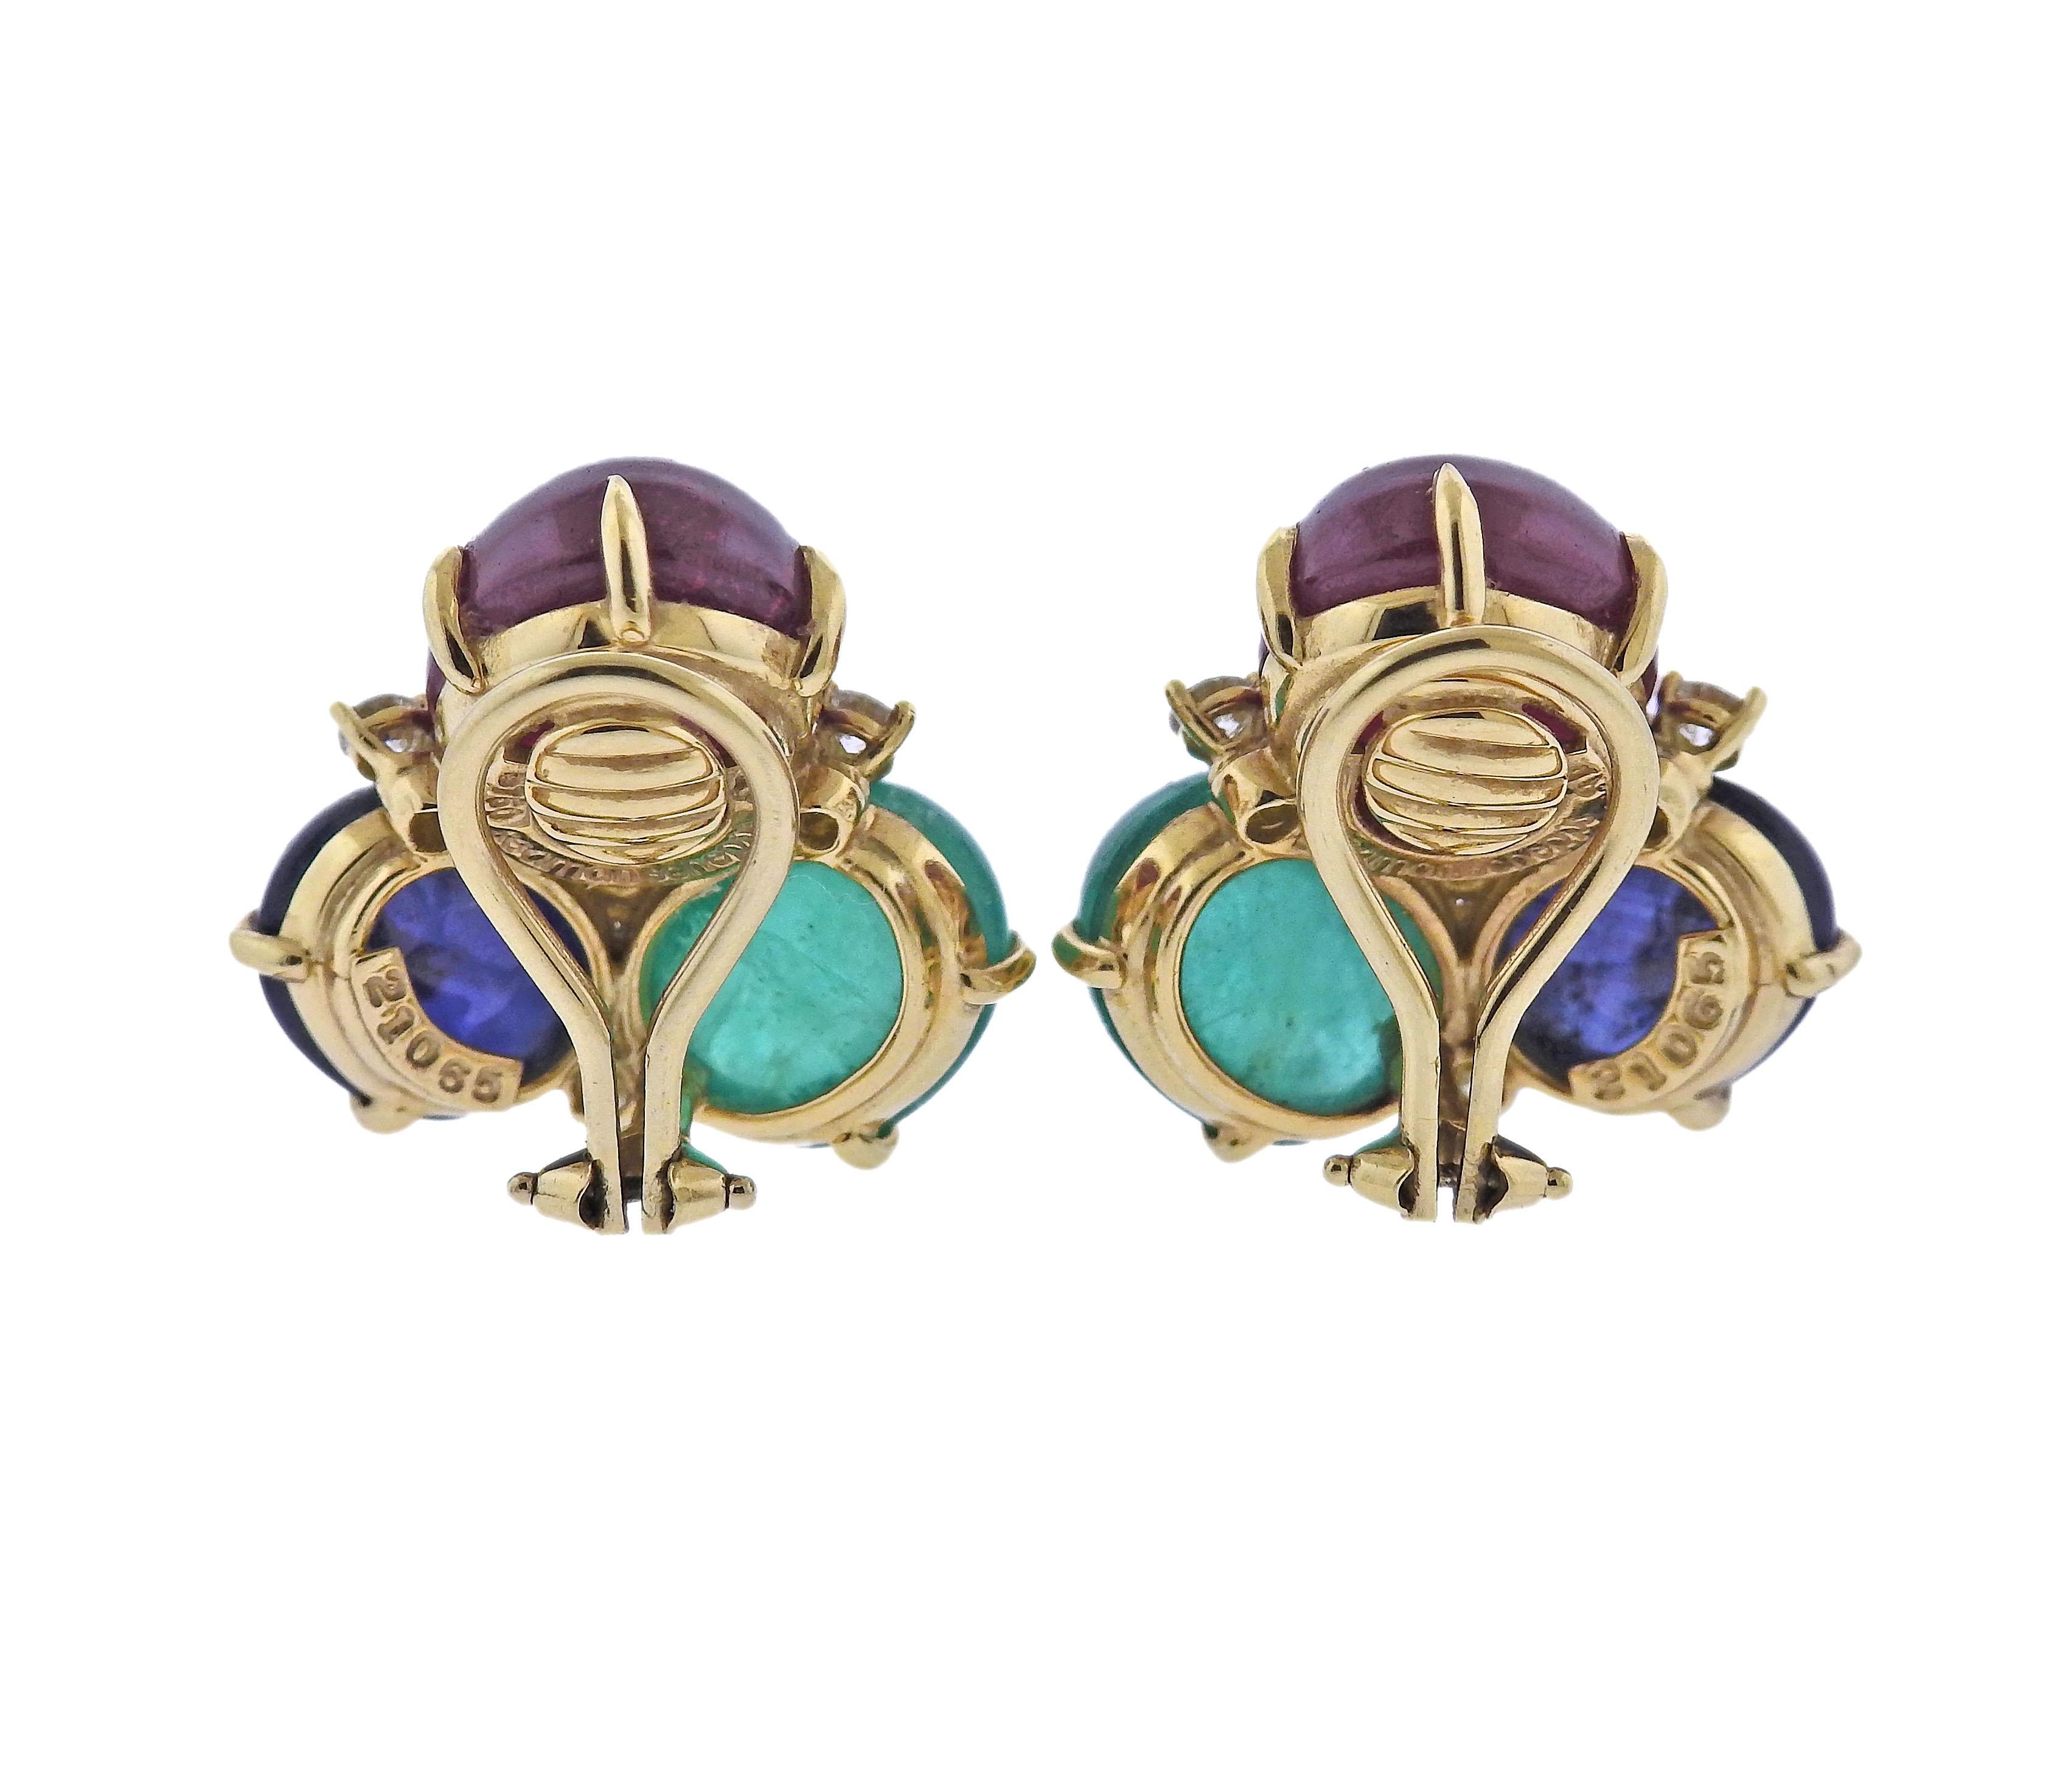 Pair of 18k gold bubble earrings by Seaman Schepps, with ruby, sapphire, emerald cabochons and approx. 0.58ctw VS/G diamonds. Earrings are 23mm x 23mm. Weight - 21 grams. Marked: Seaman Schepps, 750, Shell mark, 21055.